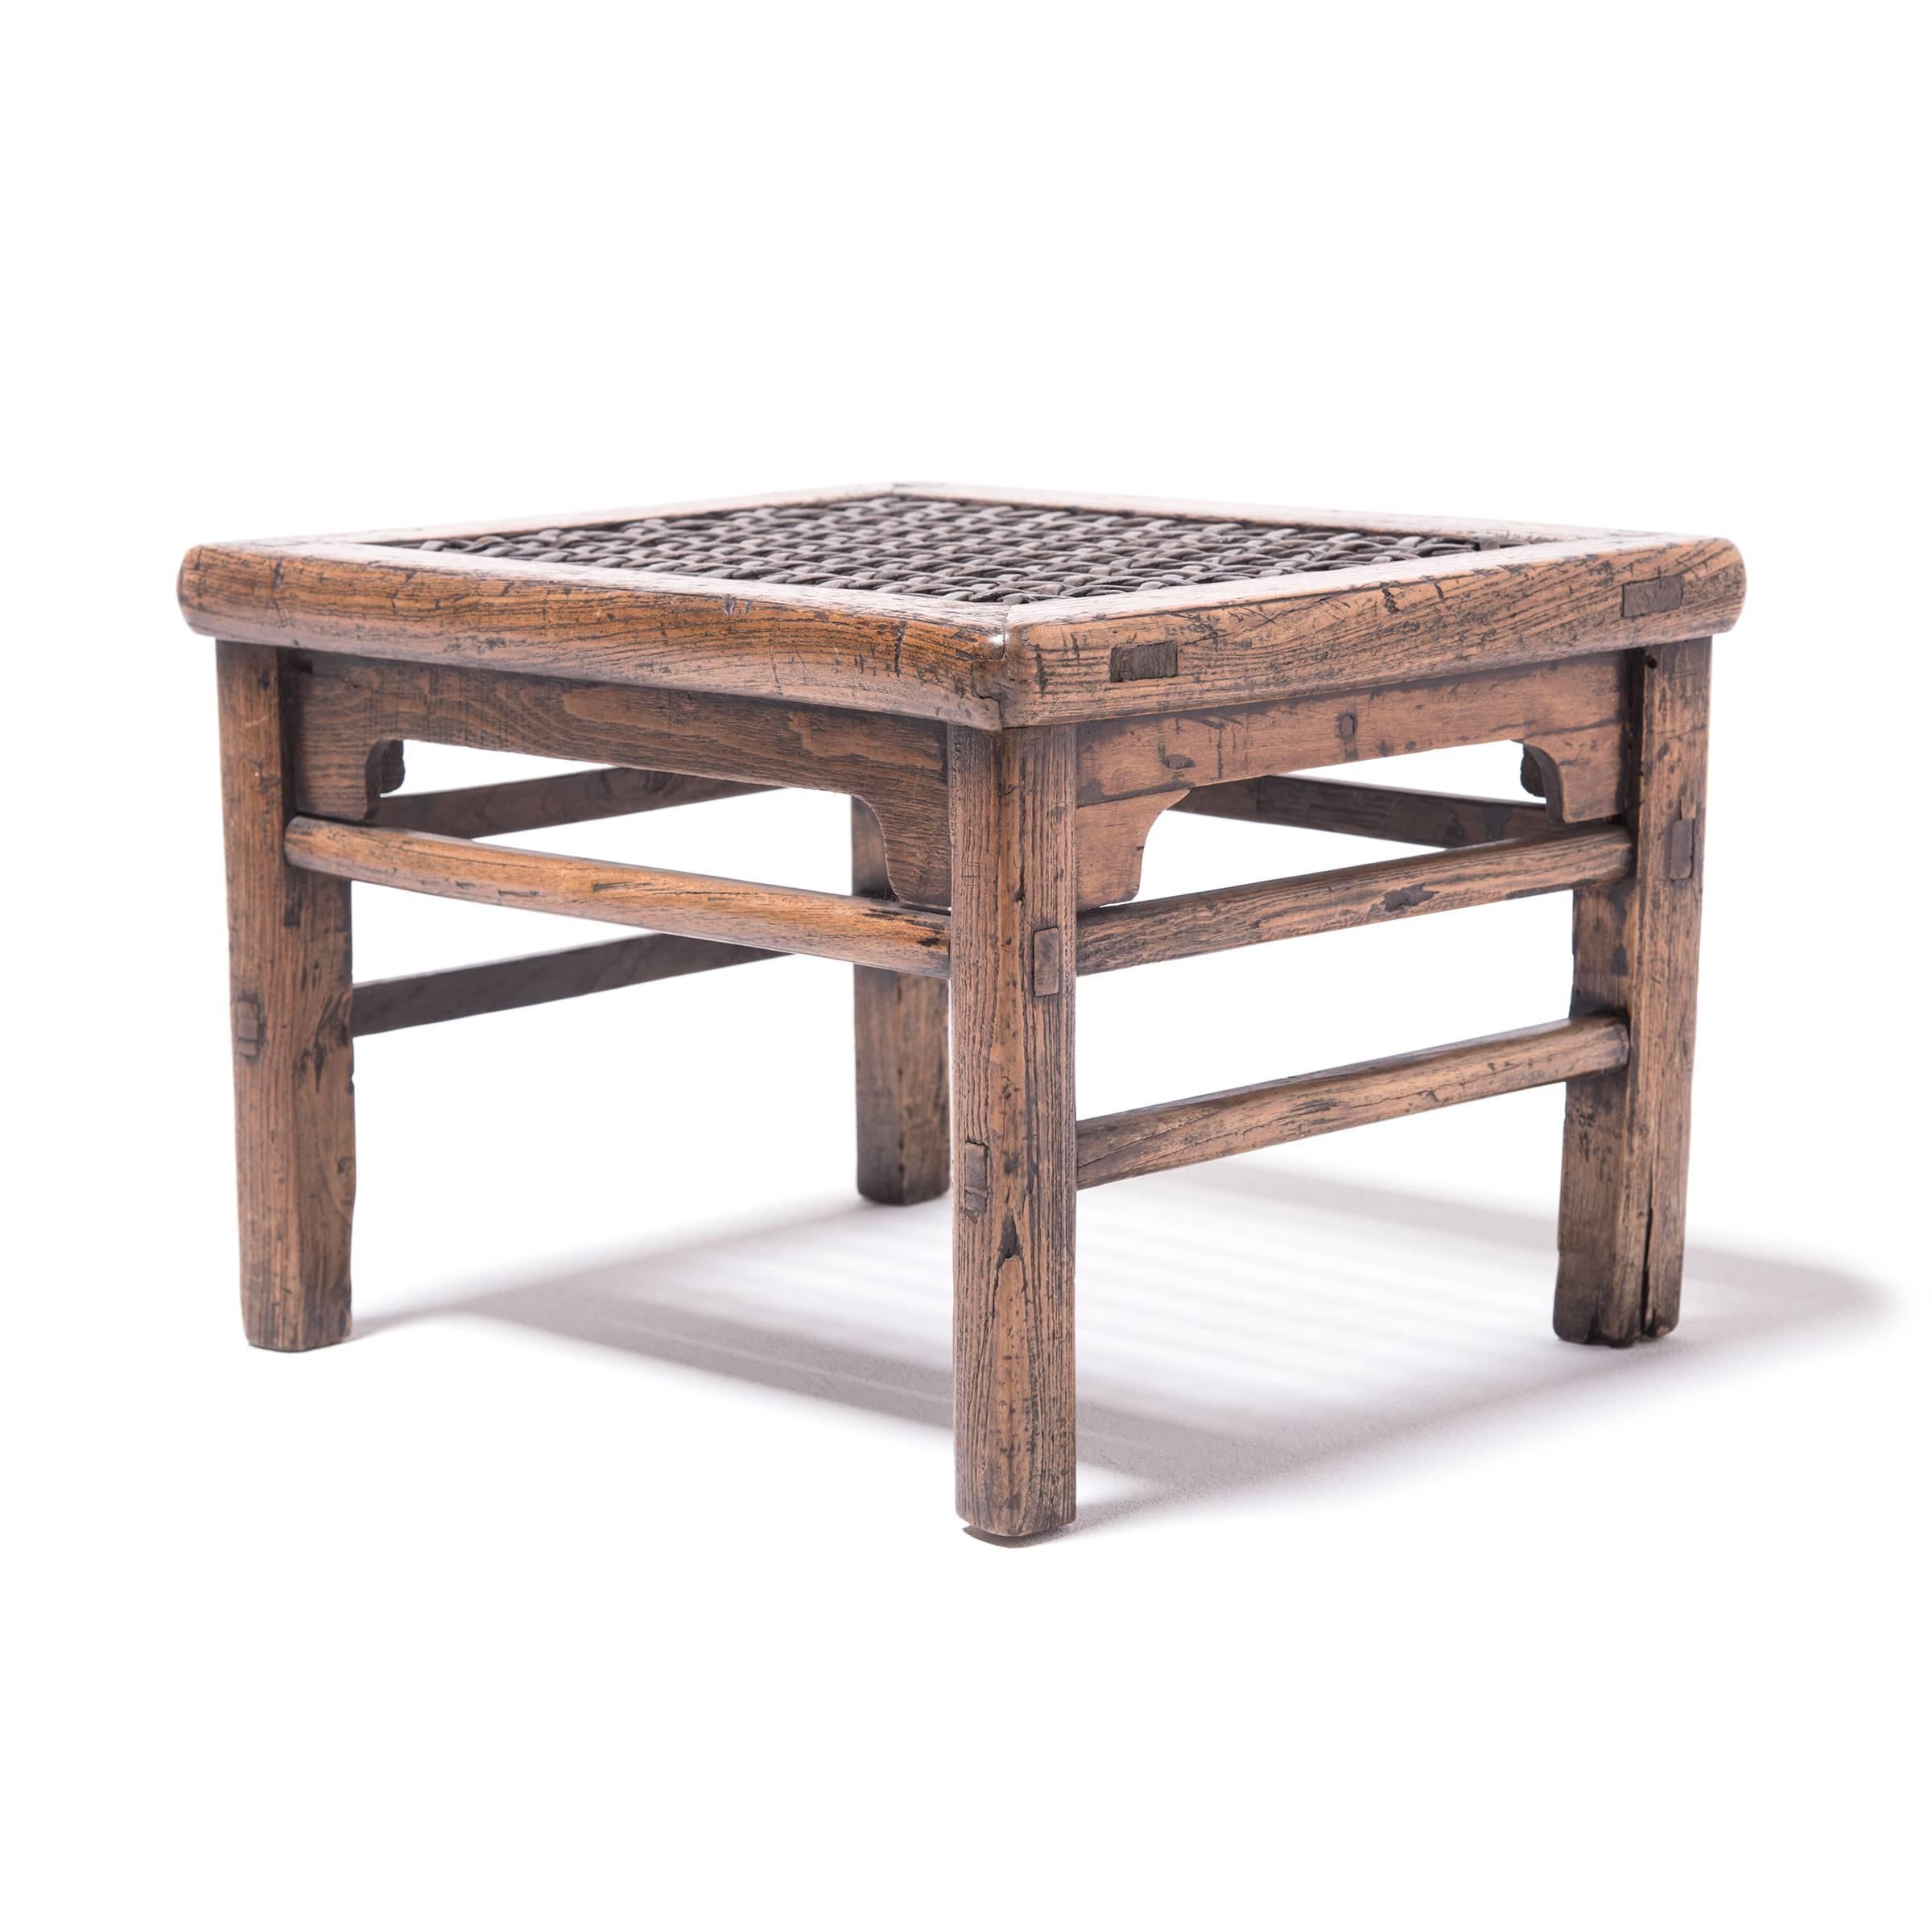 The top of this stool was woven with incredible care by a skilled artisan who used thin strips of hide to create multiple patterns in the seat, including stars. The hand-hewn elmwood stool with exposed joinery was crafted in Northern China over 150